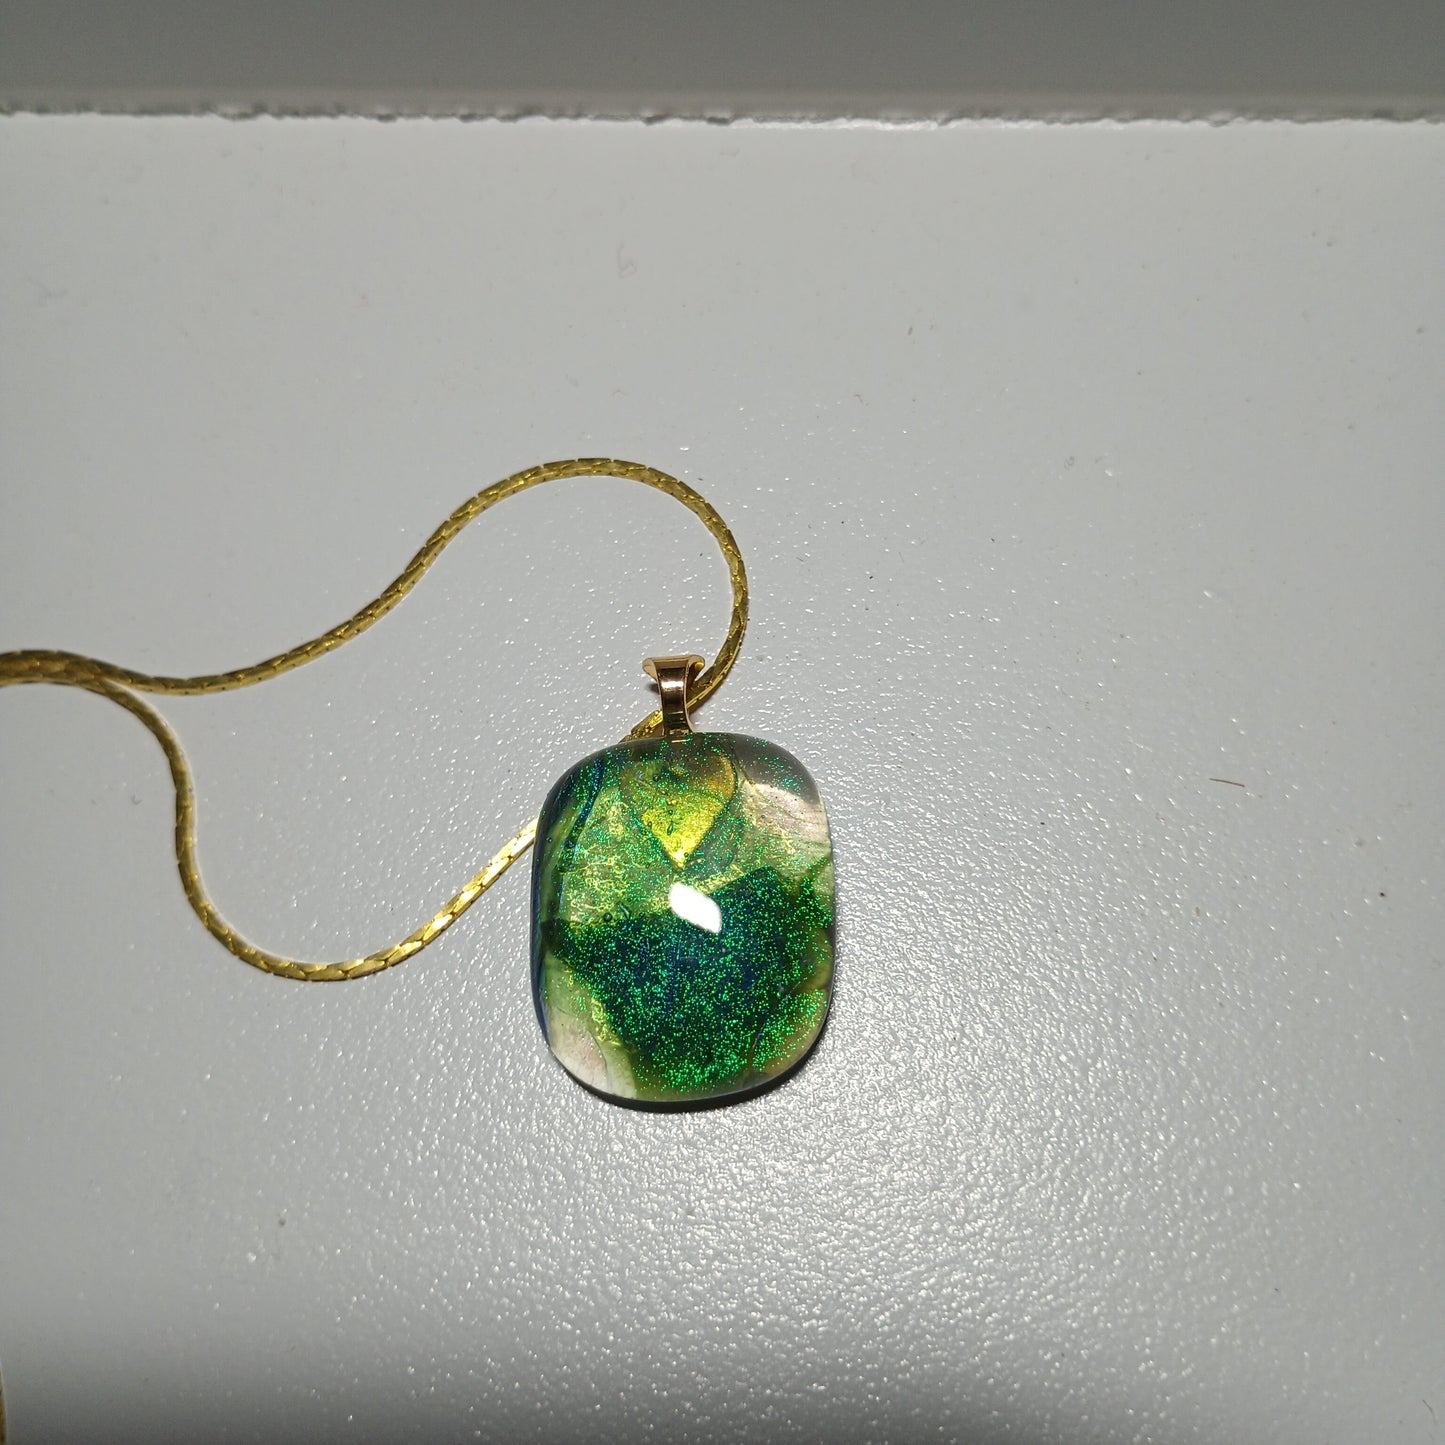 Dichroic Fused Glass Pendant Green/Blue, Gold Colored Chain